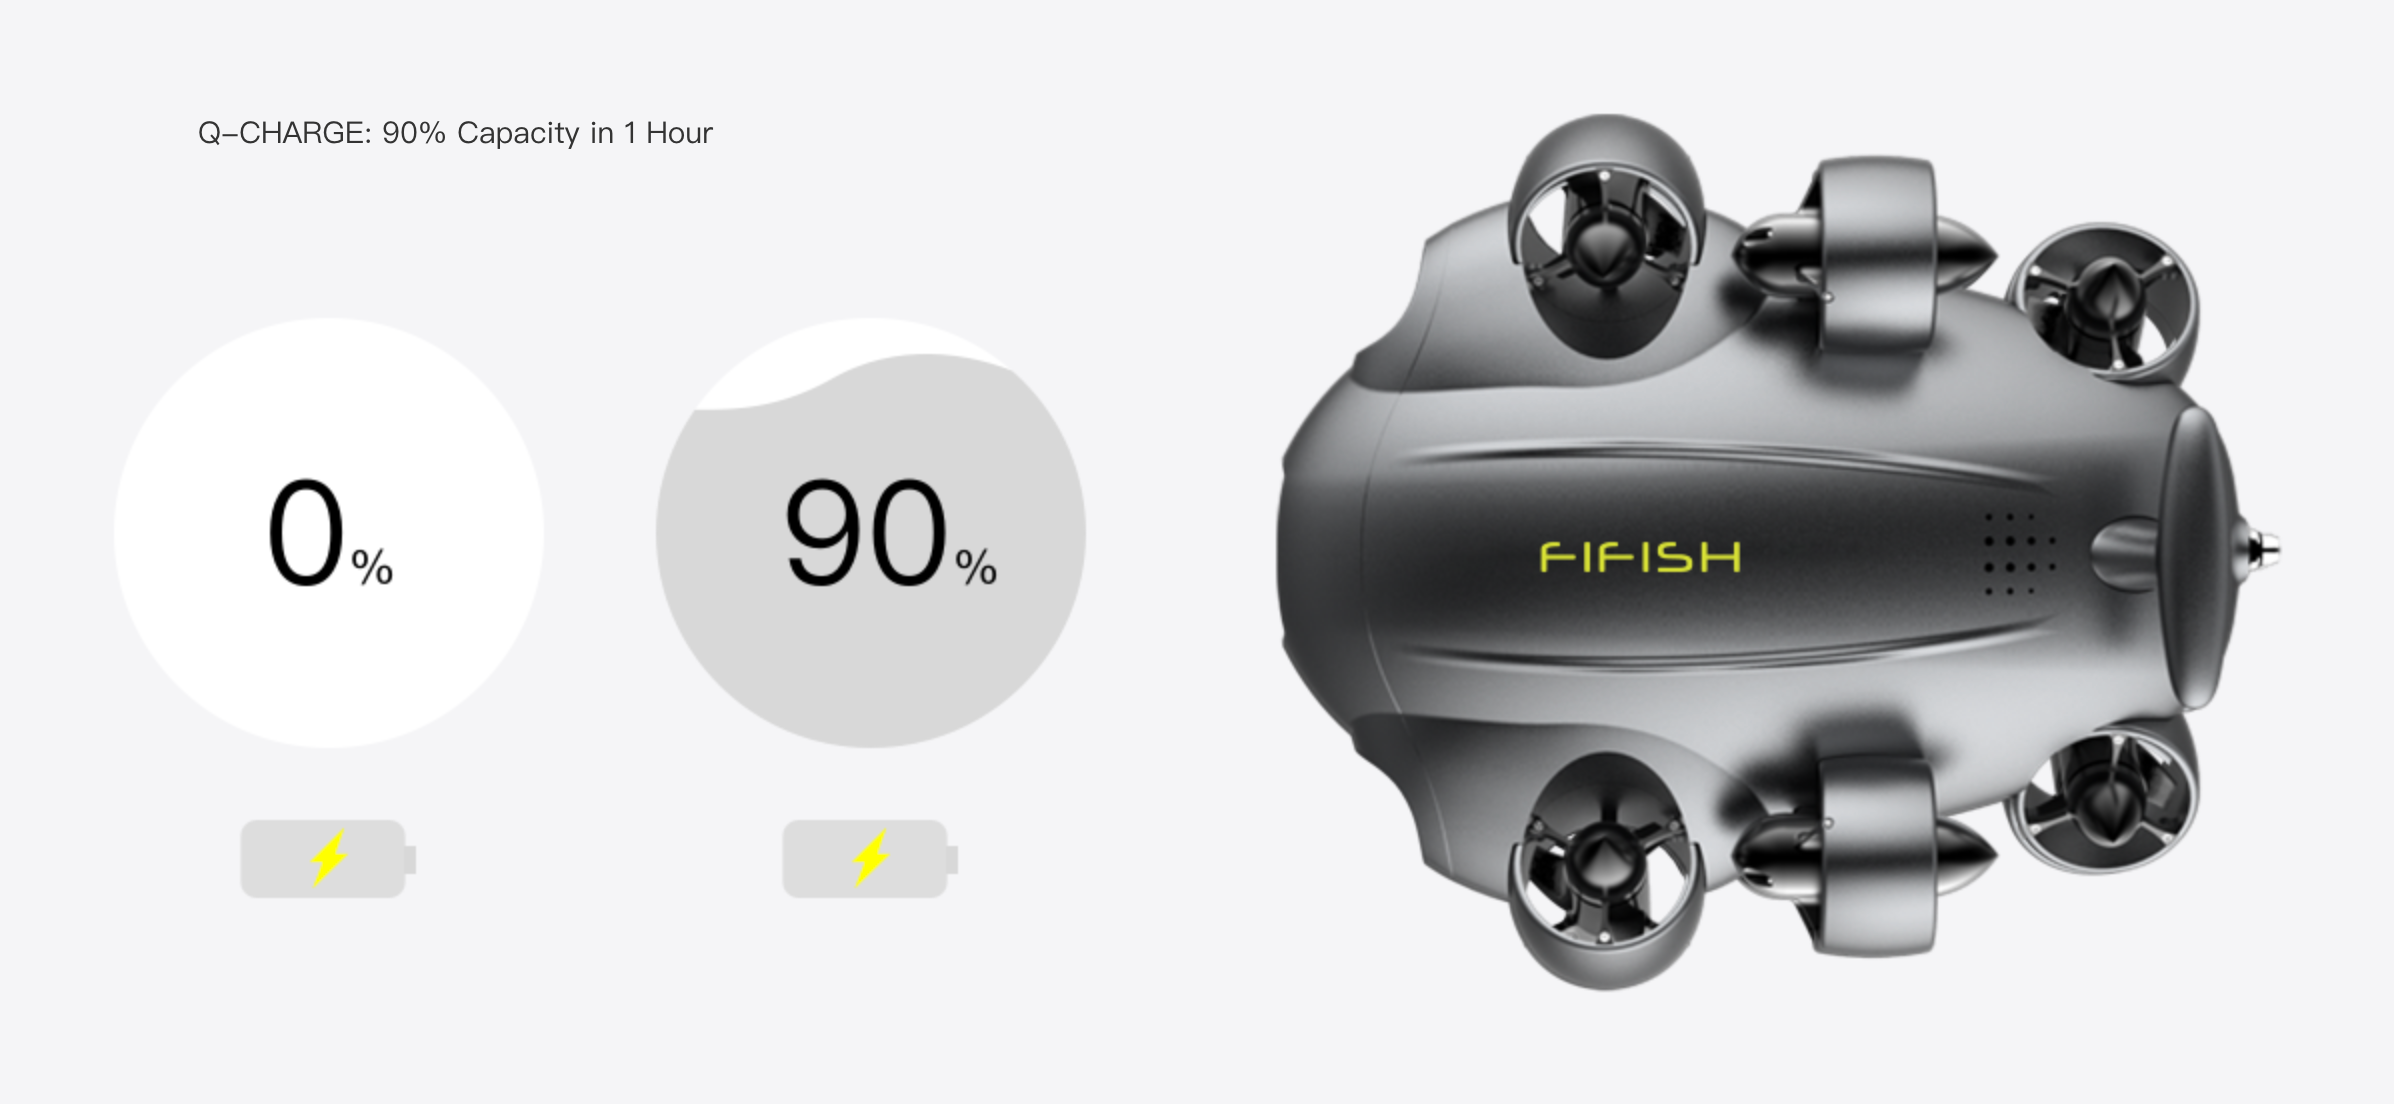 Qysea FIFISH V6 EXPERT Professional Underwater Drone for Productivity12